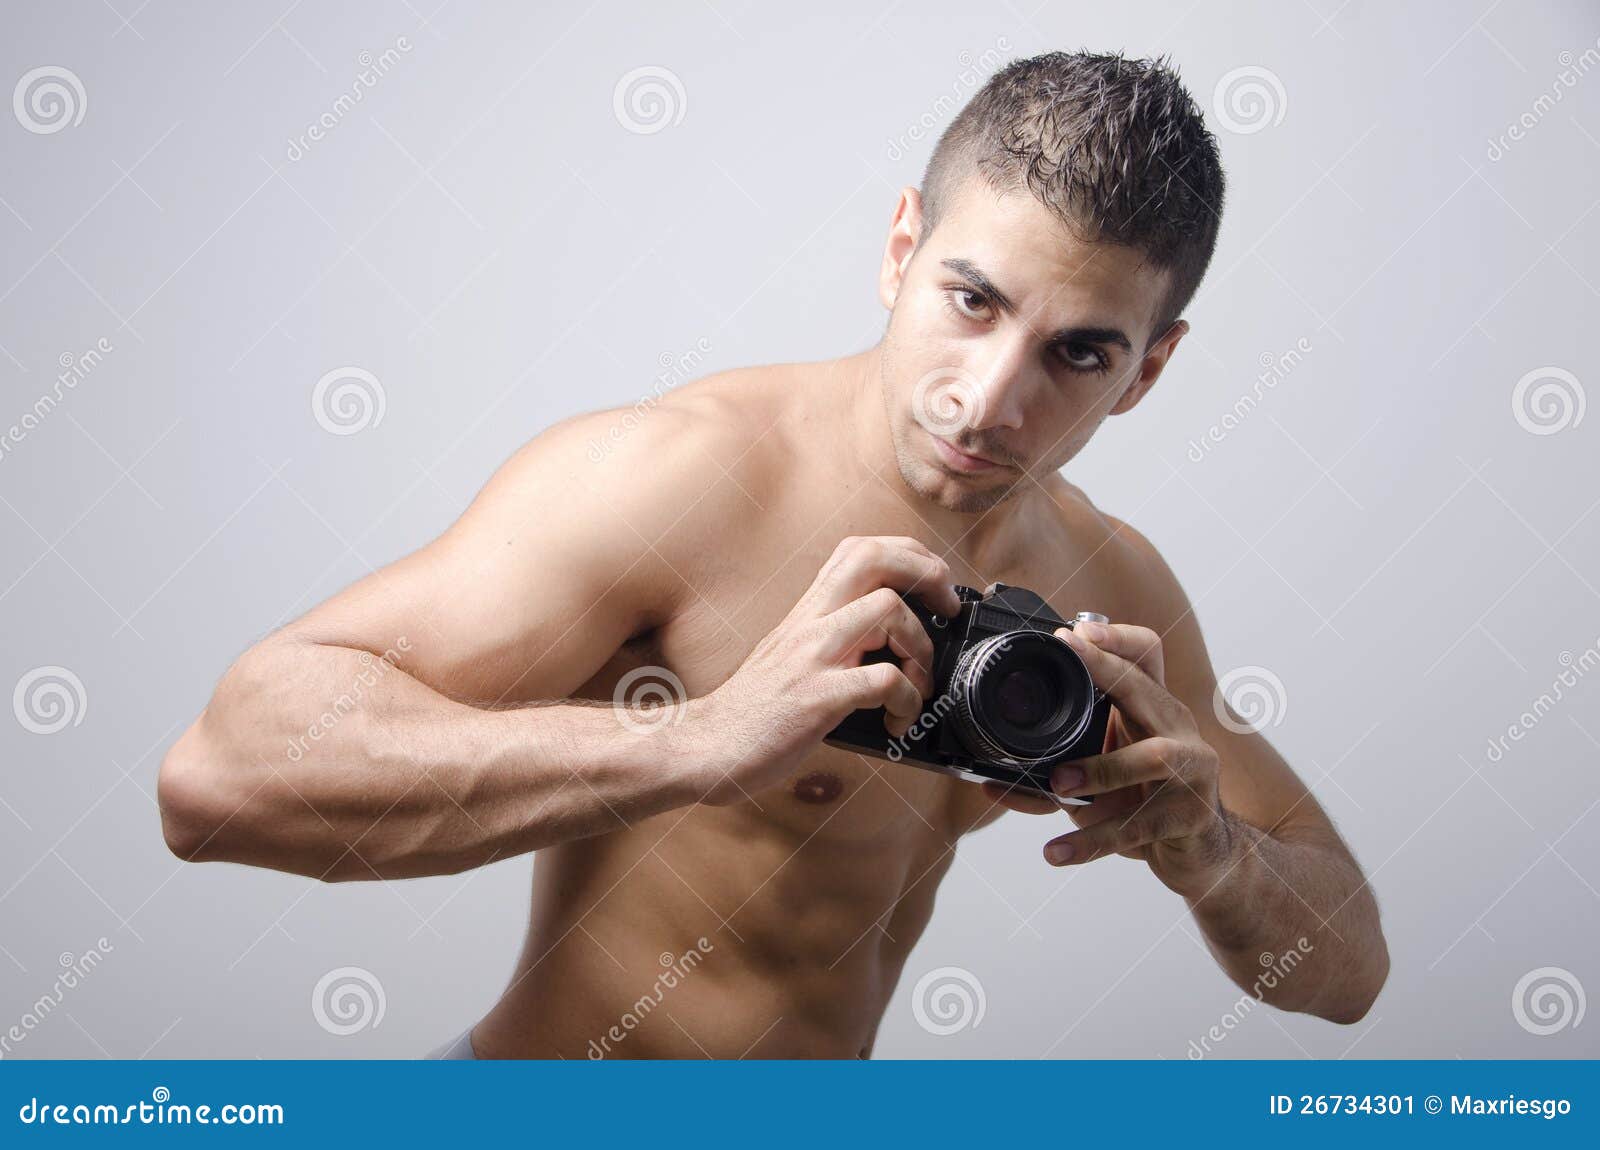 Photographer Stock Image Image Of Beauty Attractive 26734301 